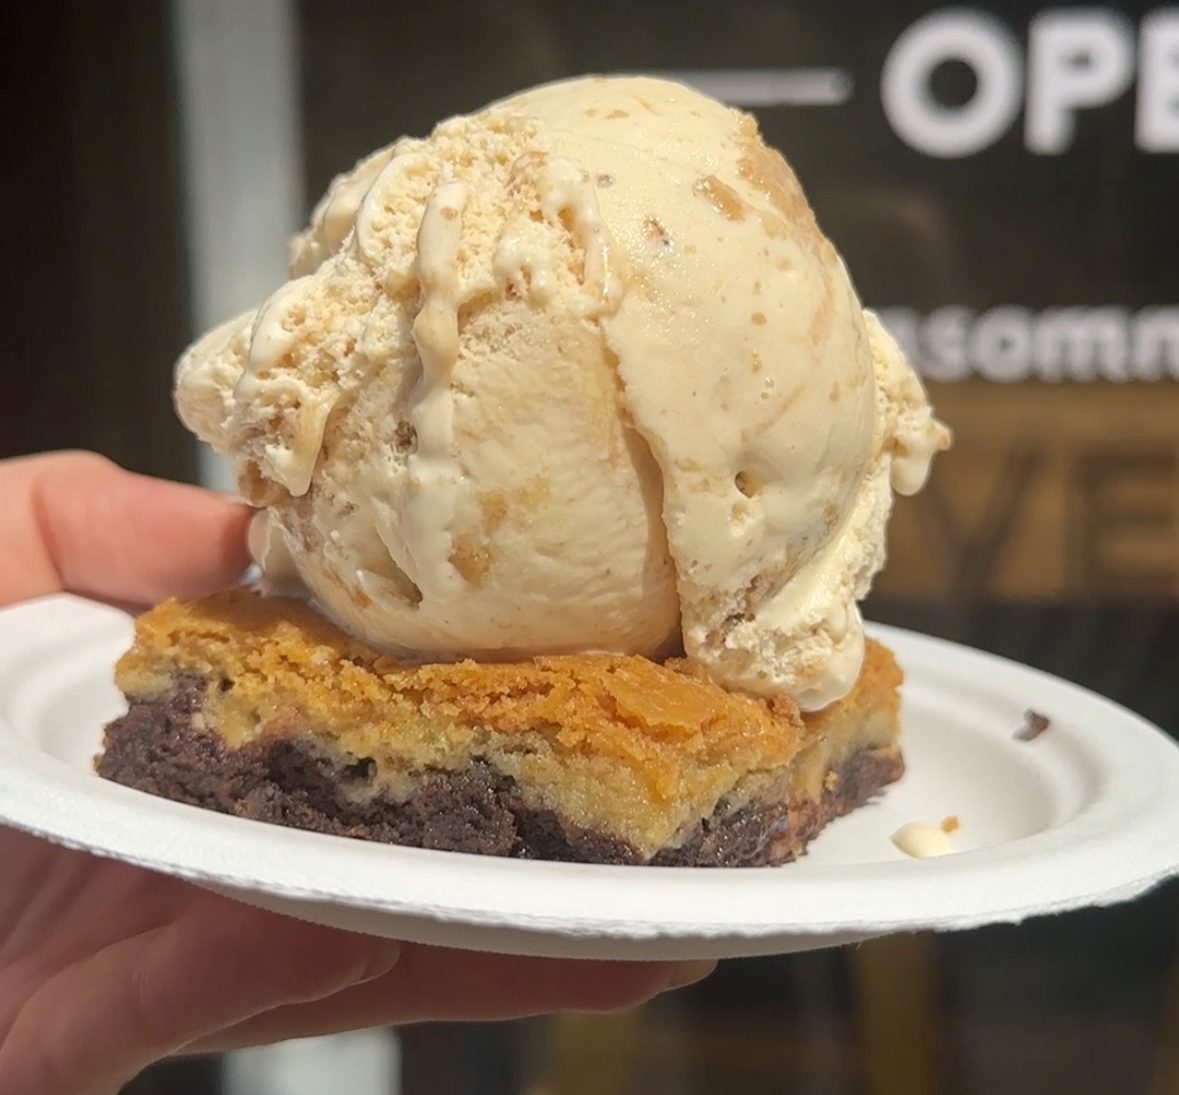 Insomnia cookies cheesecake blondie with ice cream on top